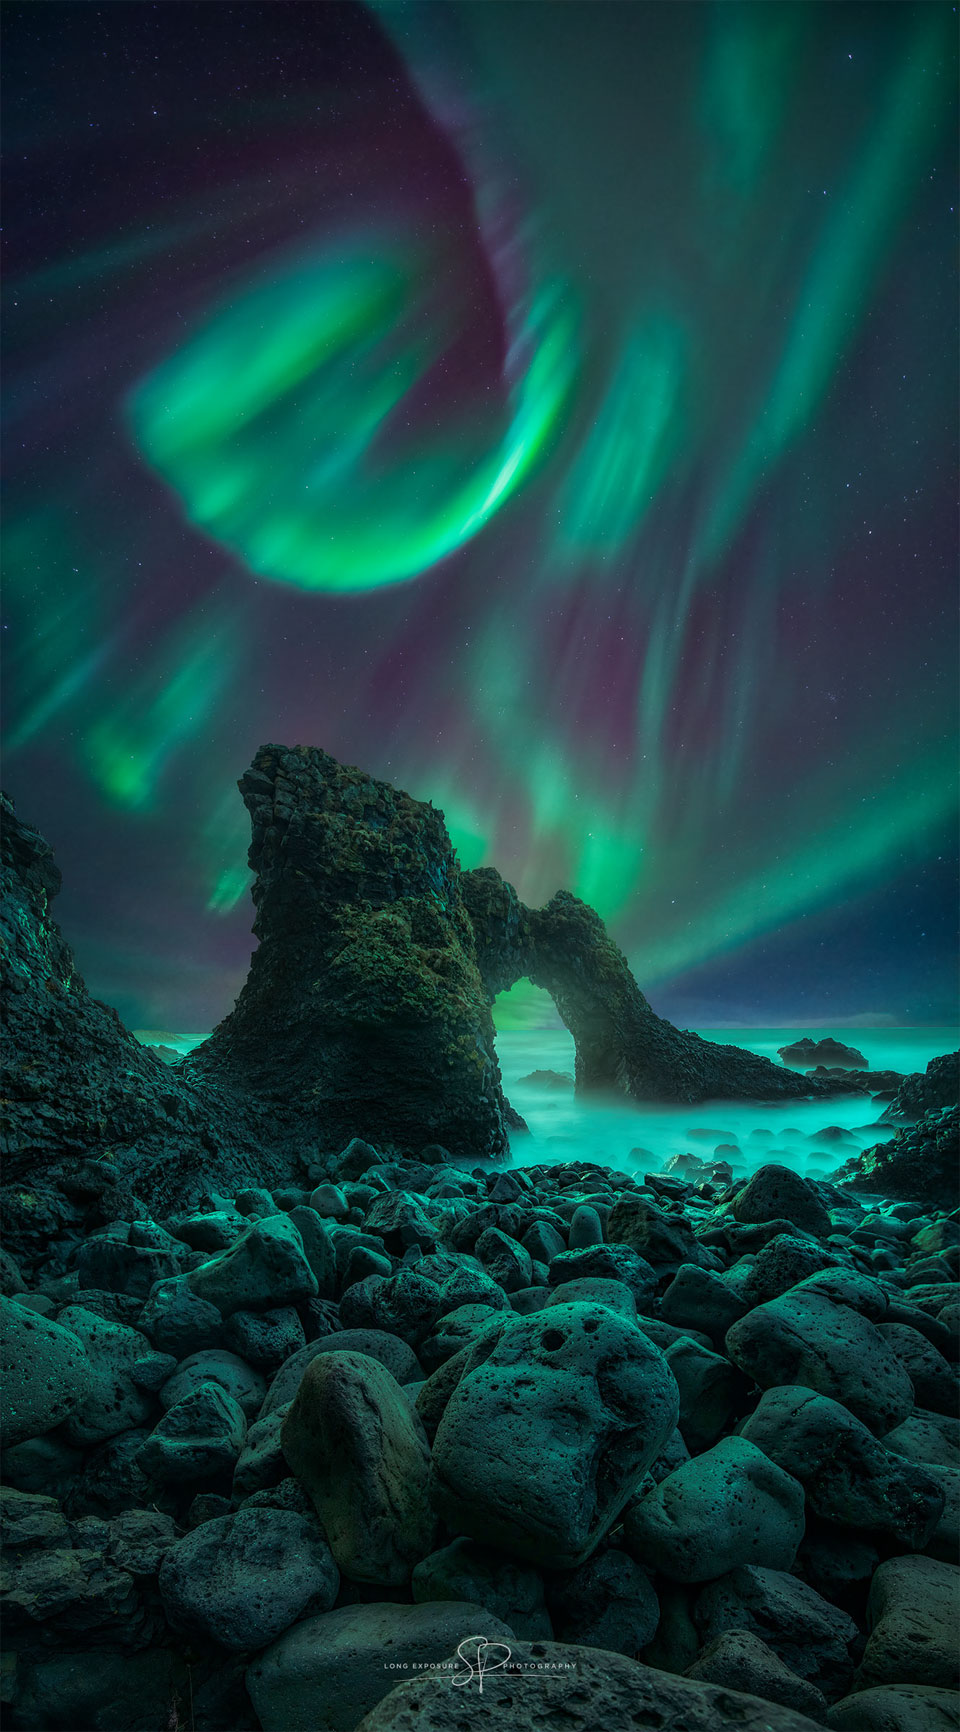 A green aurora is pictured above and beyond a dark rocky arch.
Faint stars dot the background.
Please see the explanation for more detailed information.